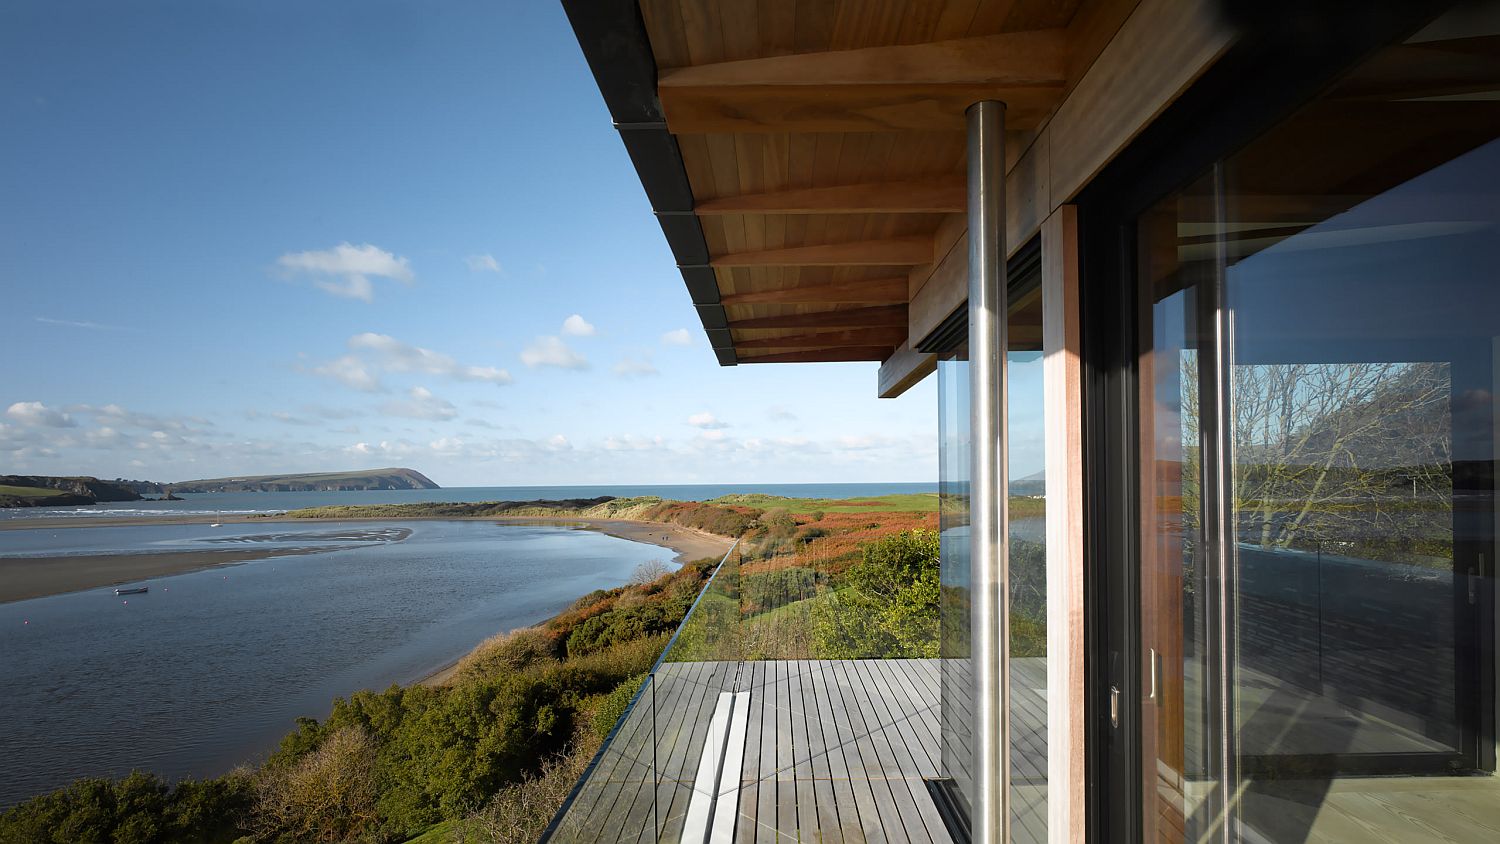 Deck-of-the-house-offers-unabated-views-of-the-landscape